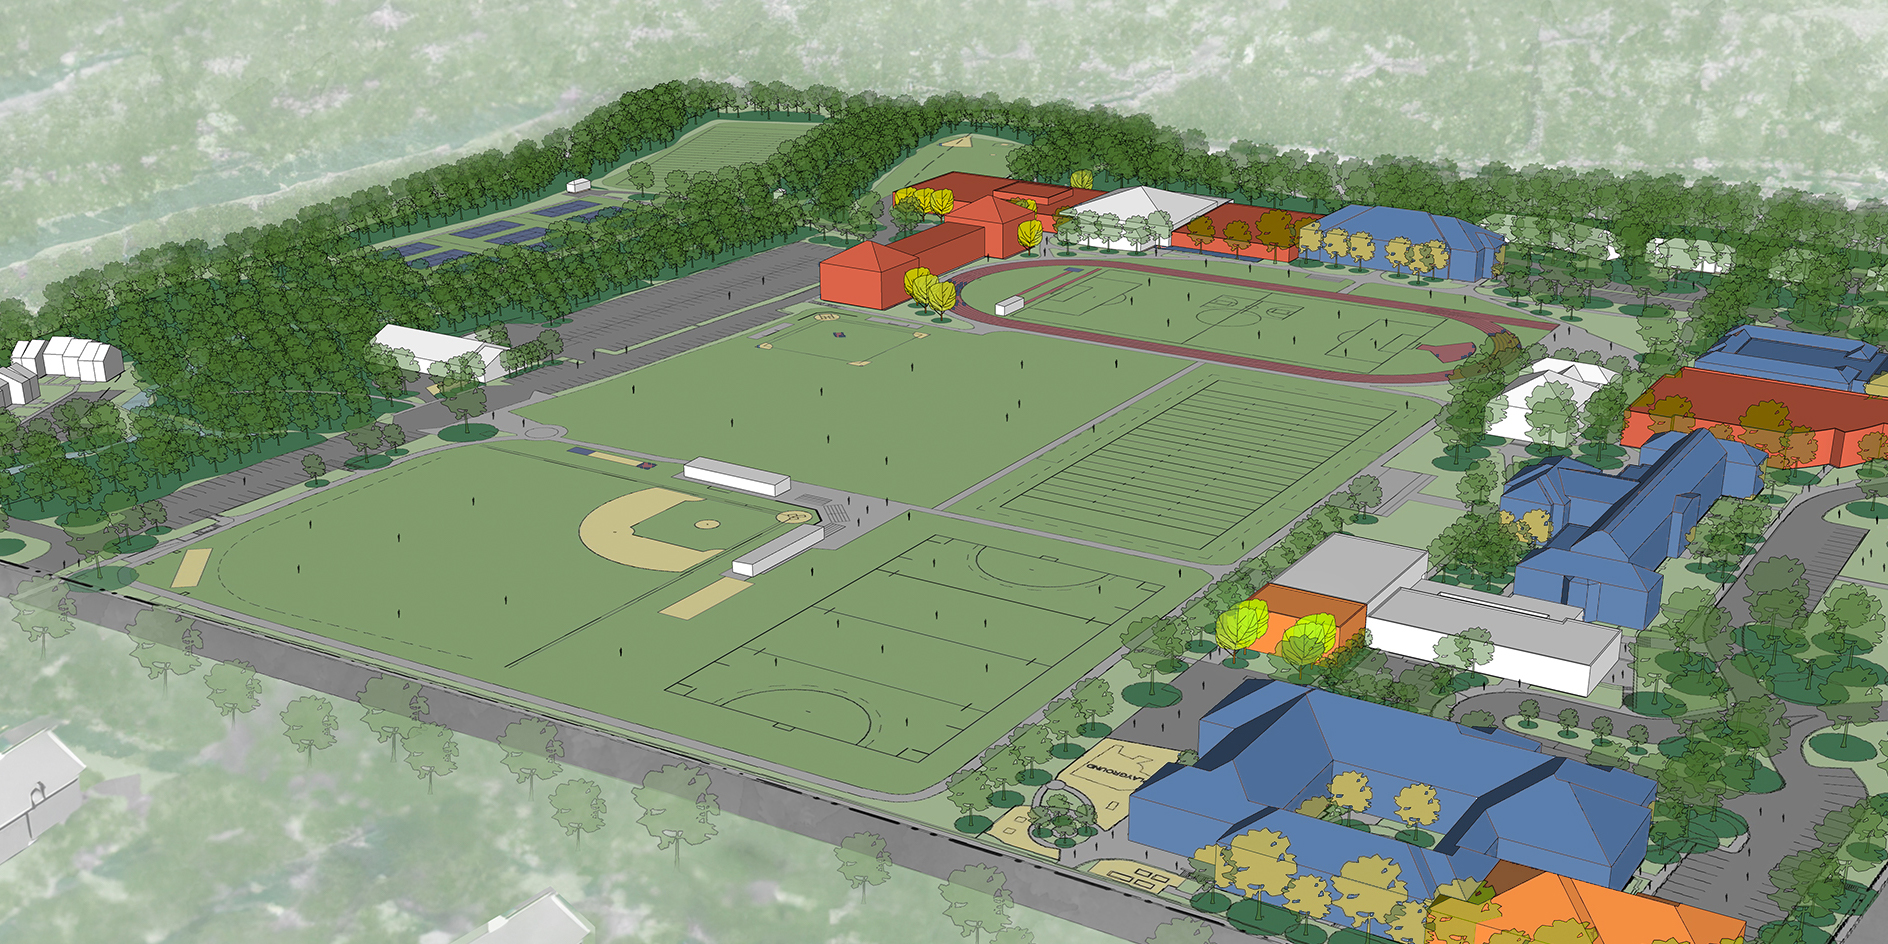 Rendering of a school campus showing buildings in blue in red, with sketched tress, baseball, soccer, and football fields